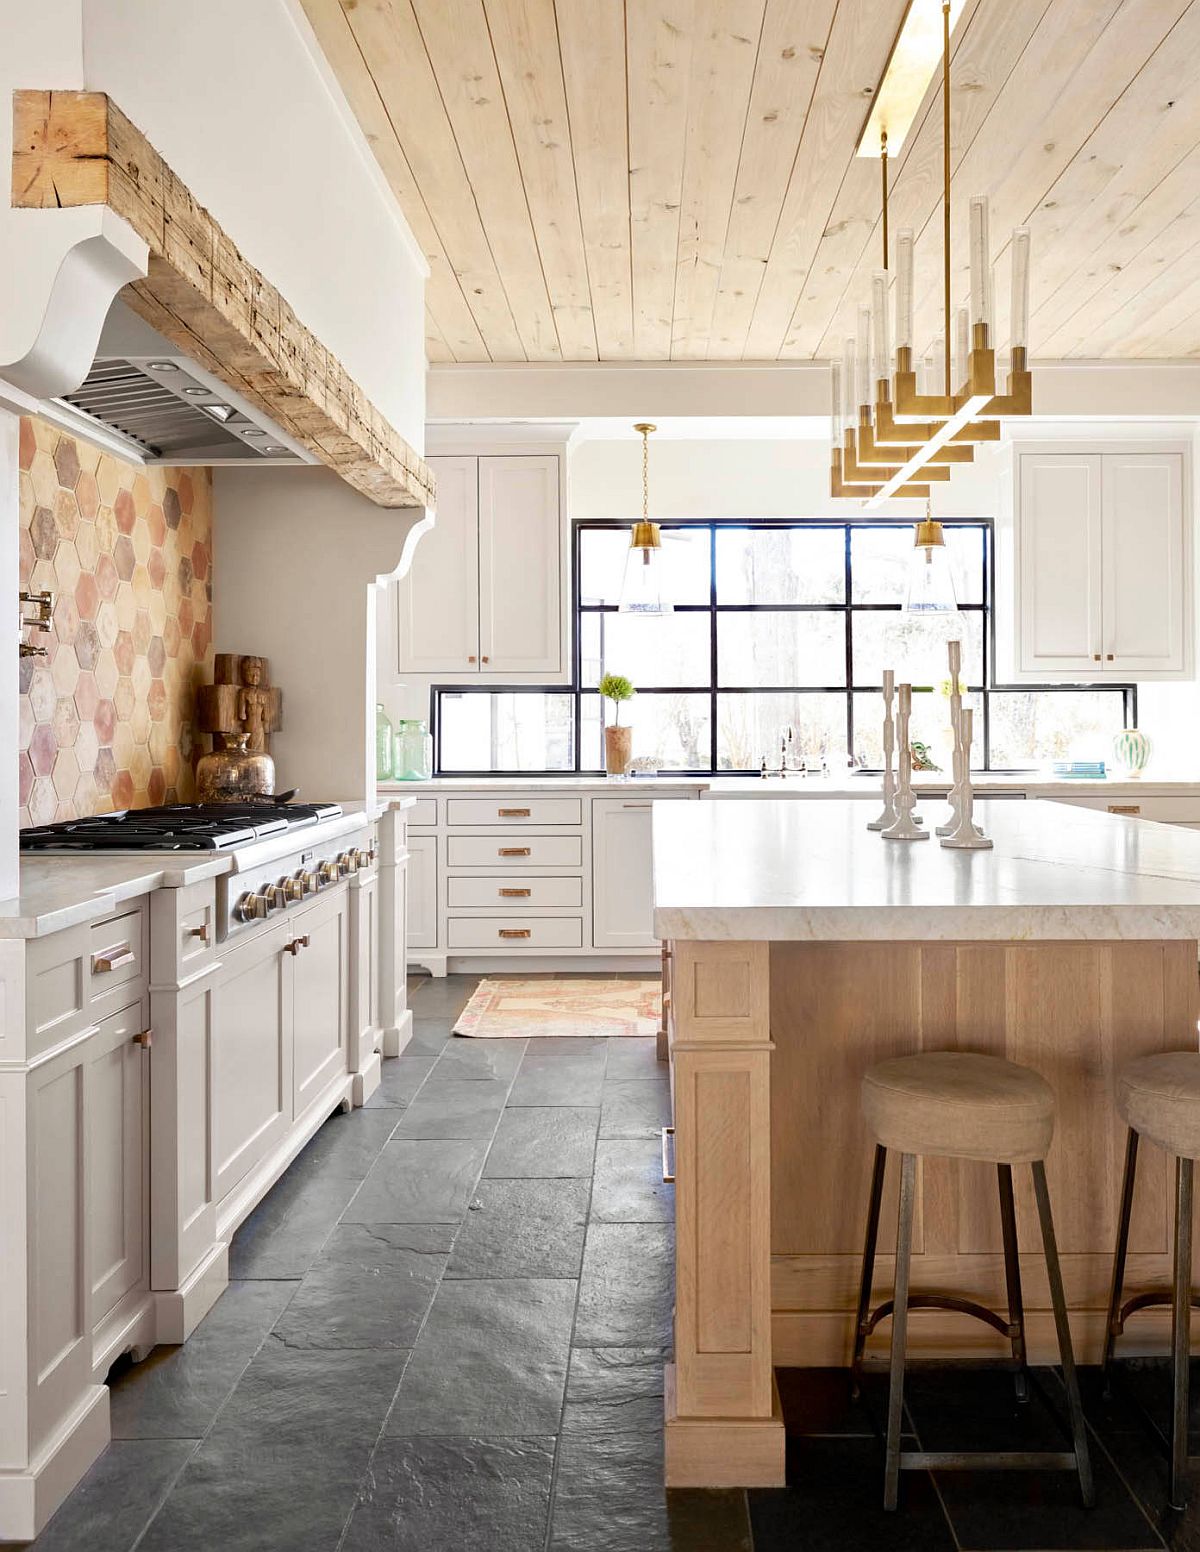 Beautiful-and-custom-backsplash-adds-to-the-farmhouse-style-of-the-kitchen